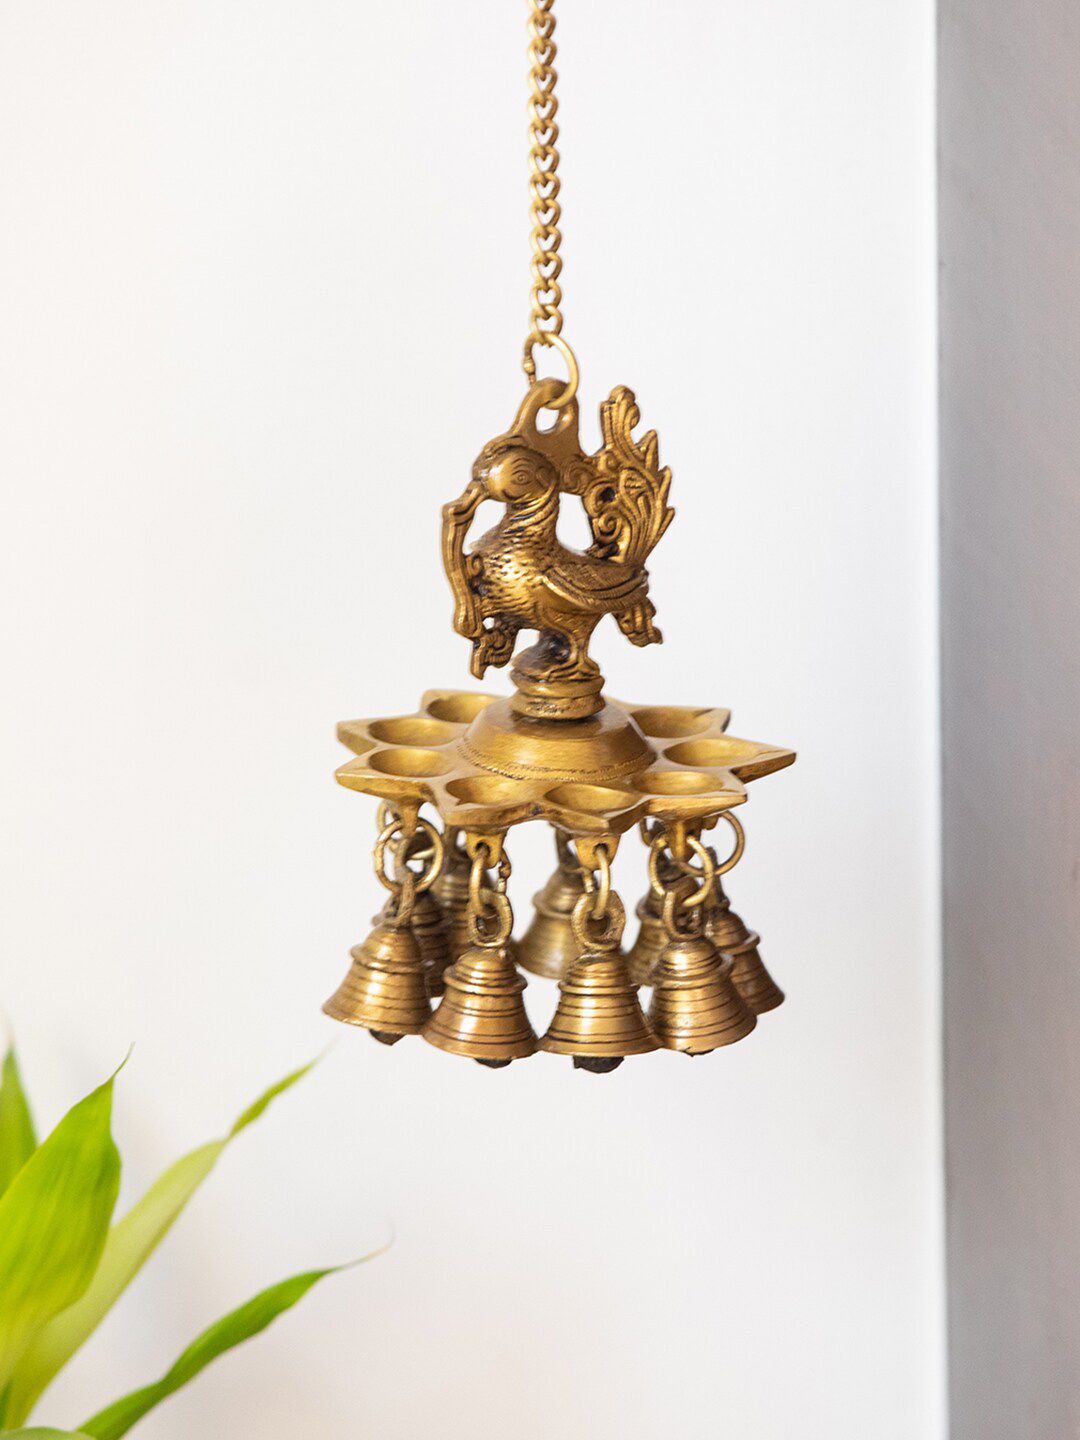 ExclusiveLane Gold-Toned Peacock Bliss' Hand-Etched Decorative Hanging Diya Price in India